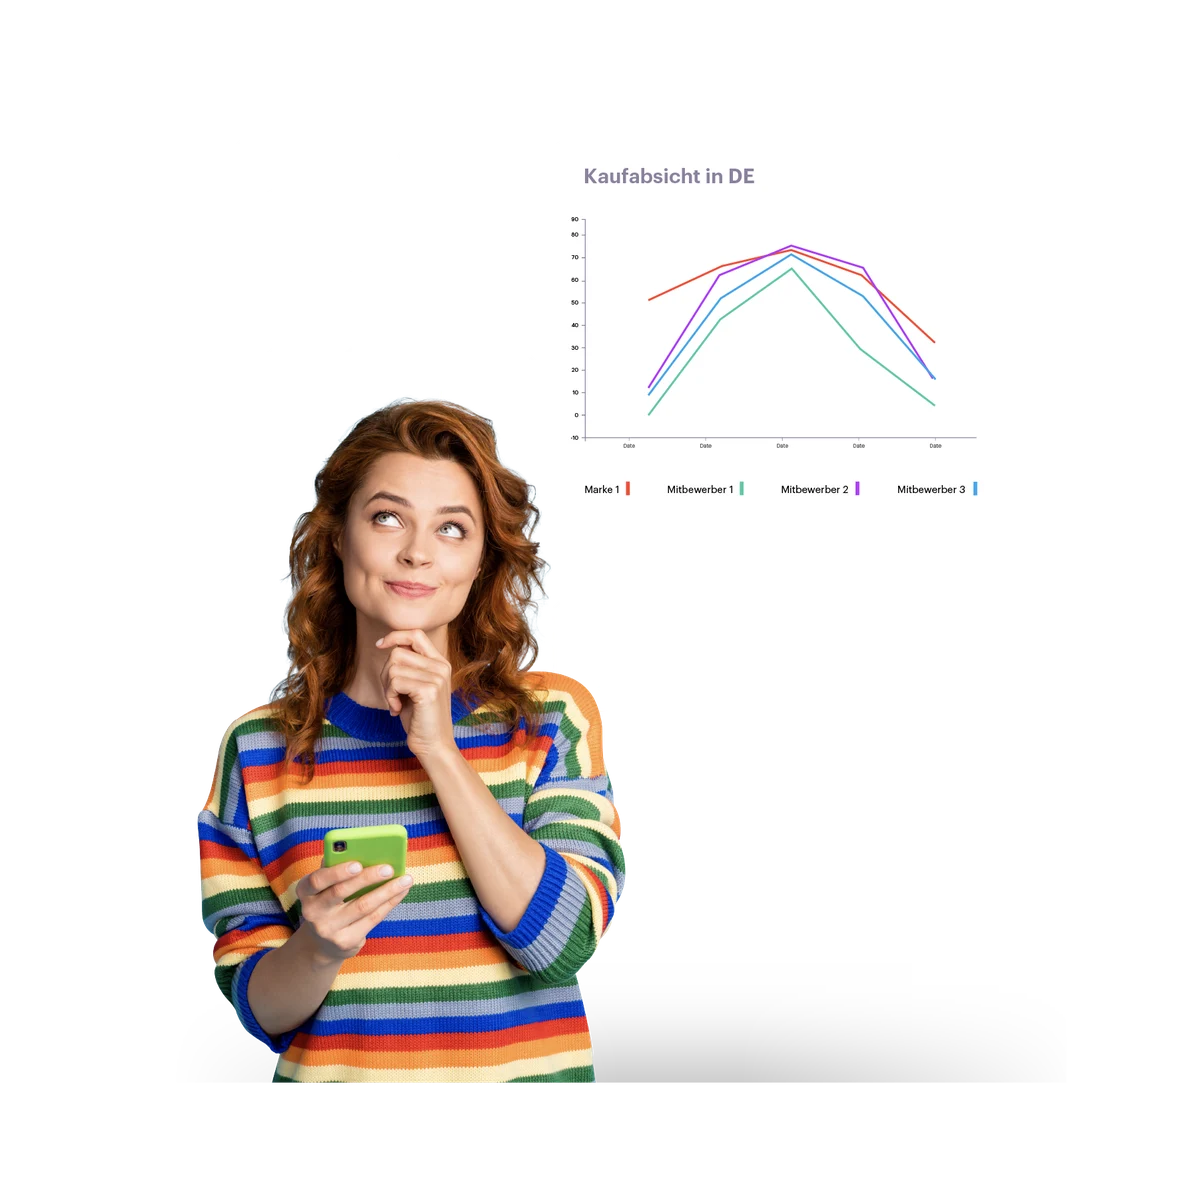 woman with colorful jumper and kaufabsicht data behind